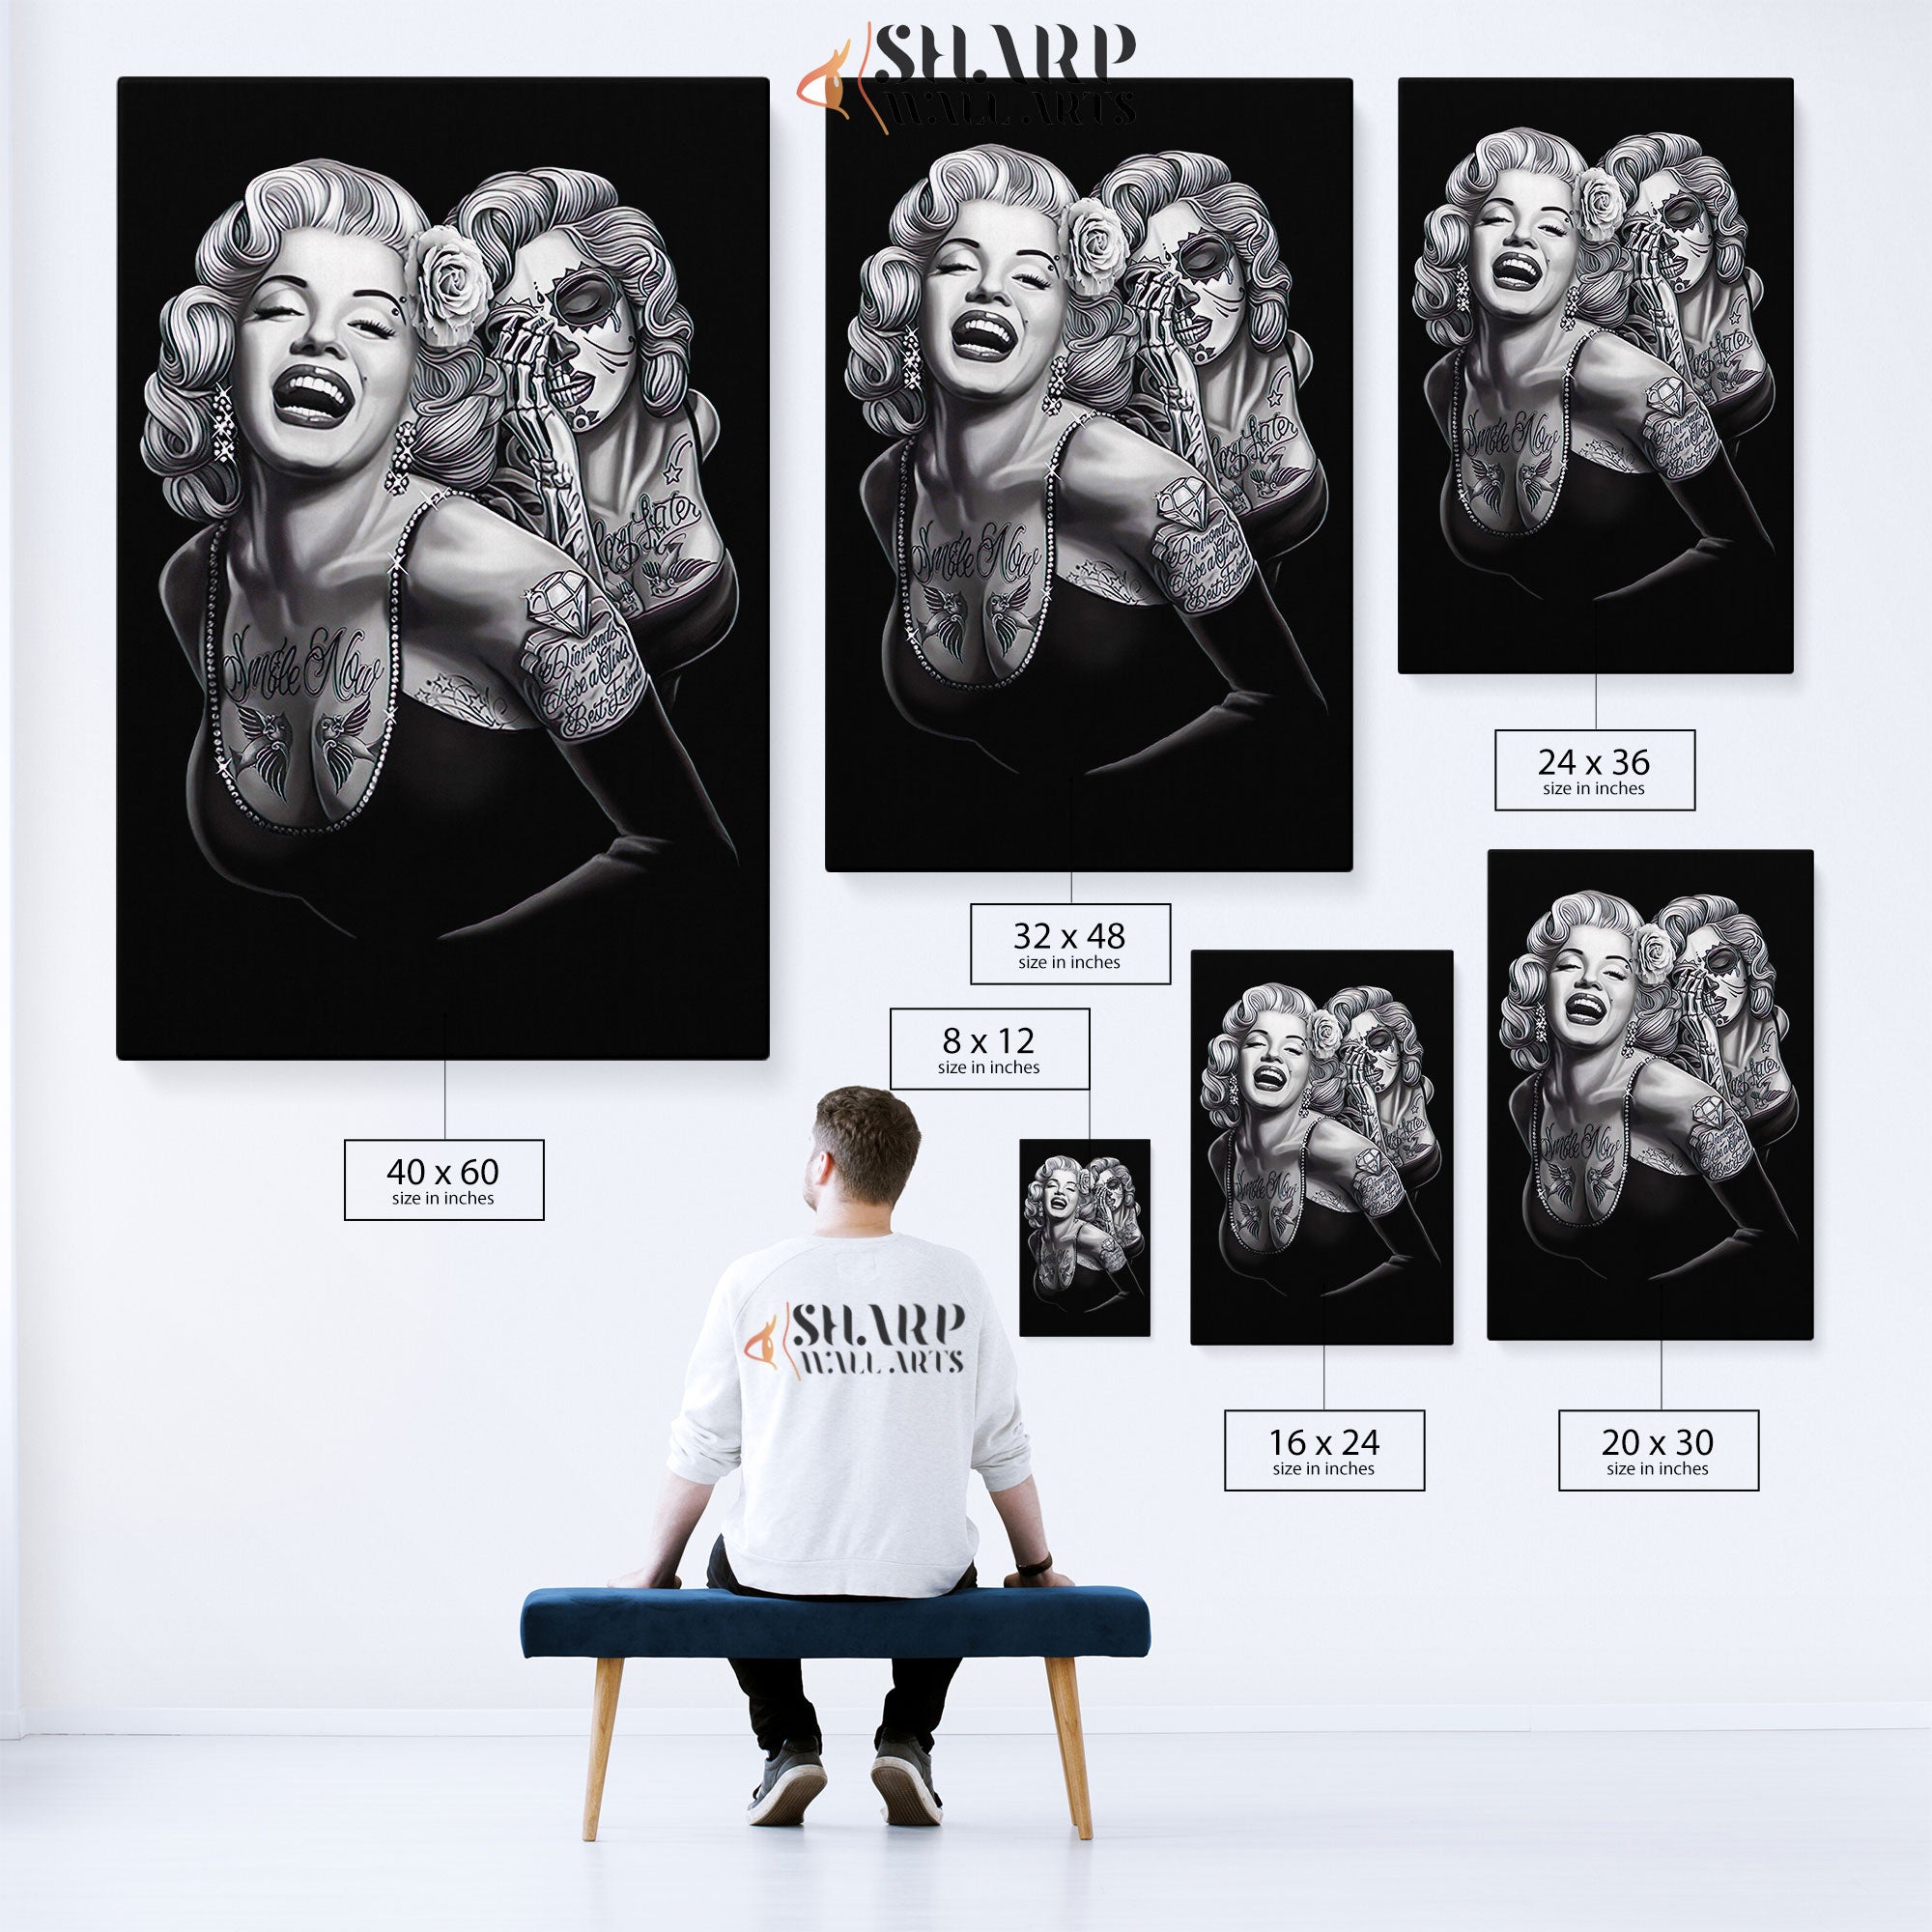 Marilyn Monroe Smile Now Cry Later Canvas Wall Art